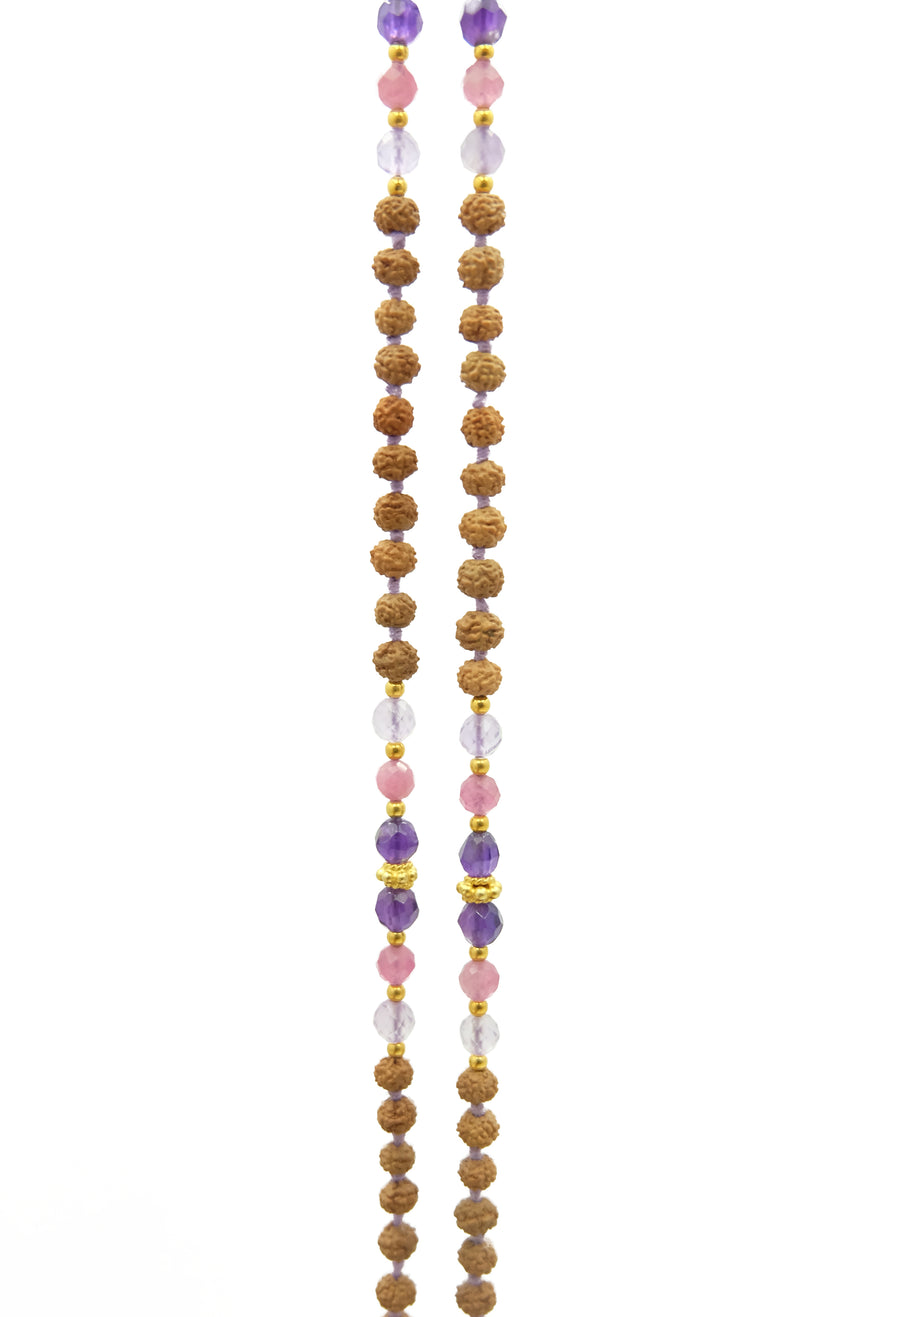 Purple Reign Mala mala necklace hand-made from rudraksha seeds, amethyst, pink tourmaline and 22k gold accents.